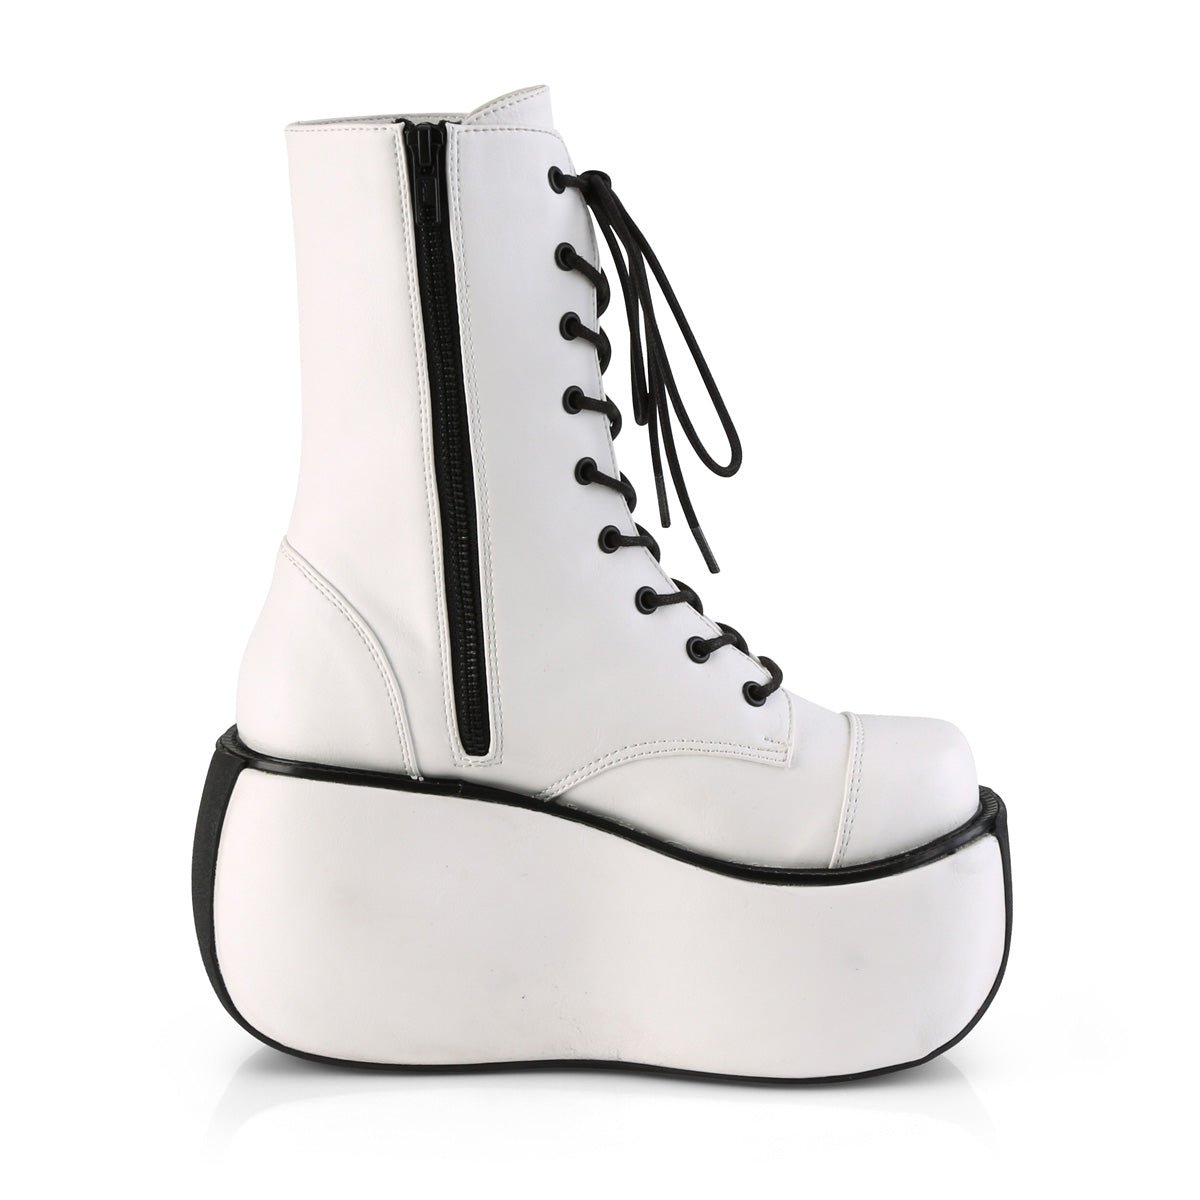 Too Fast | Demonia Violet 120 | White Vegan Leather Women's Ankle Boots